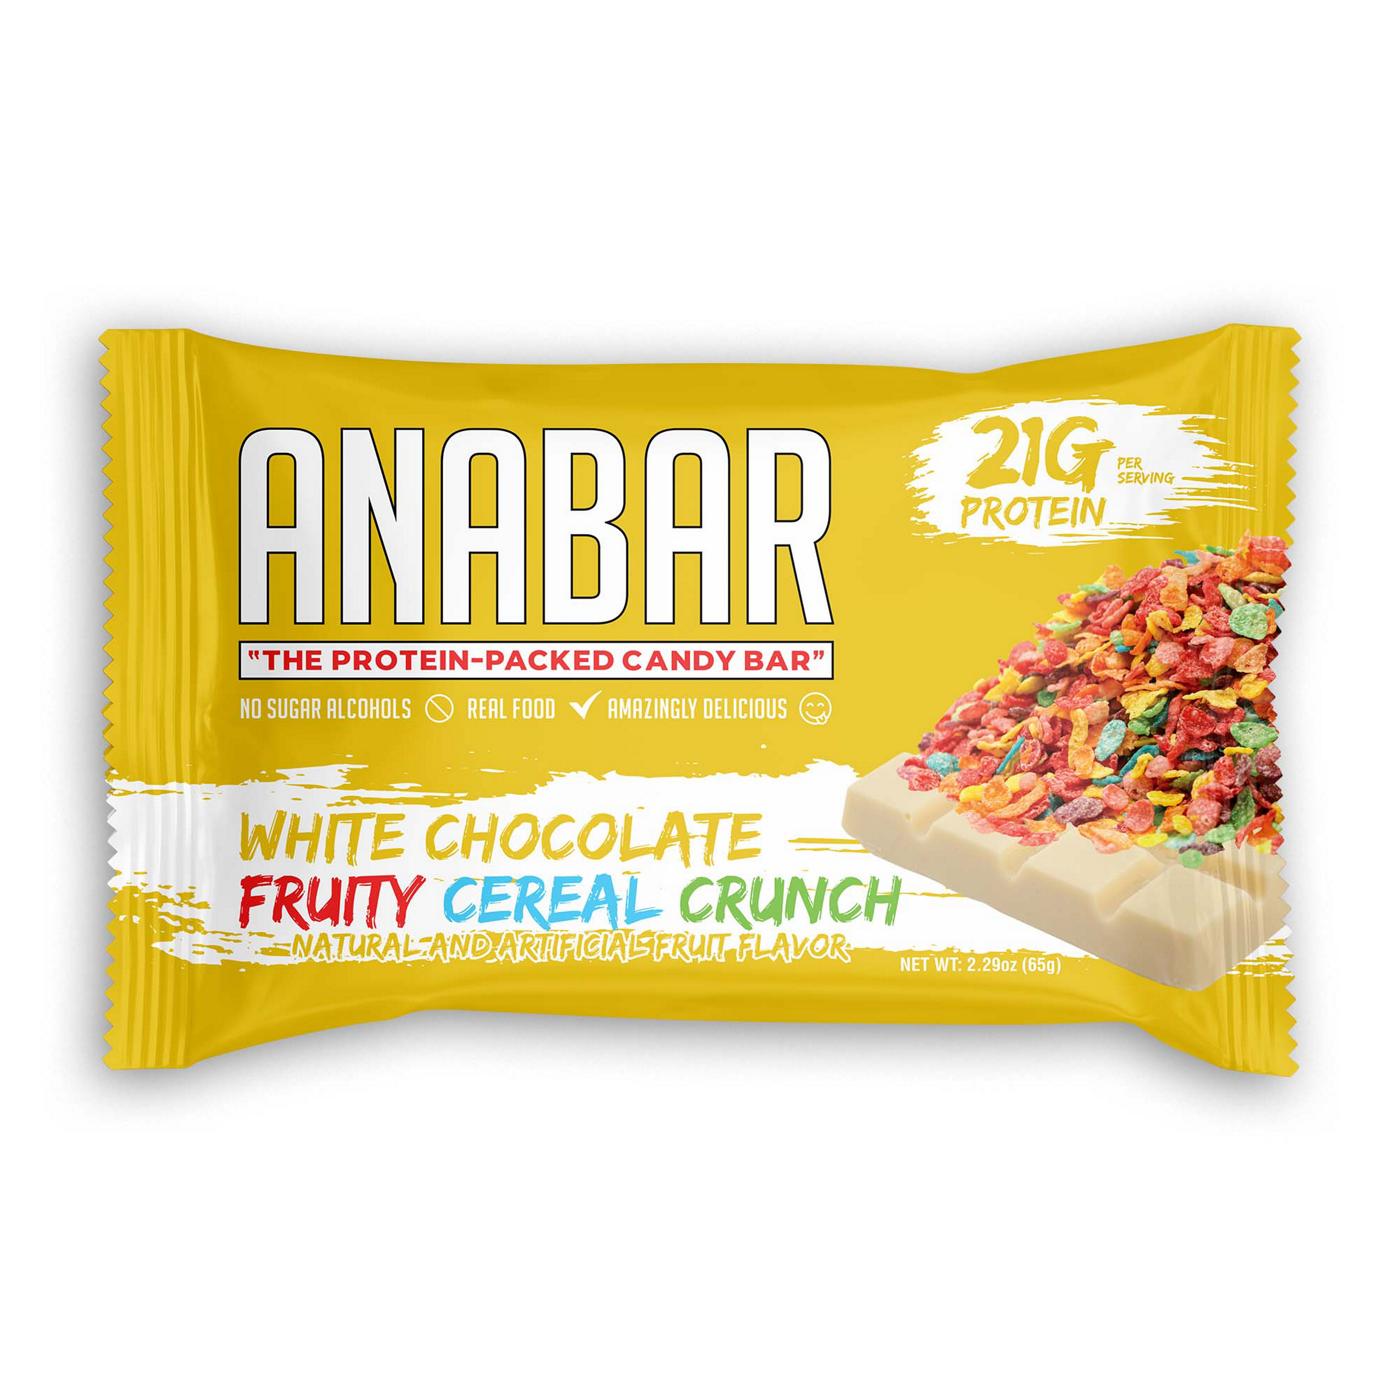 Anabar 21g Protein Performance Bar - White Chocolate Fruity Cereal Crunch; image 1 of 2